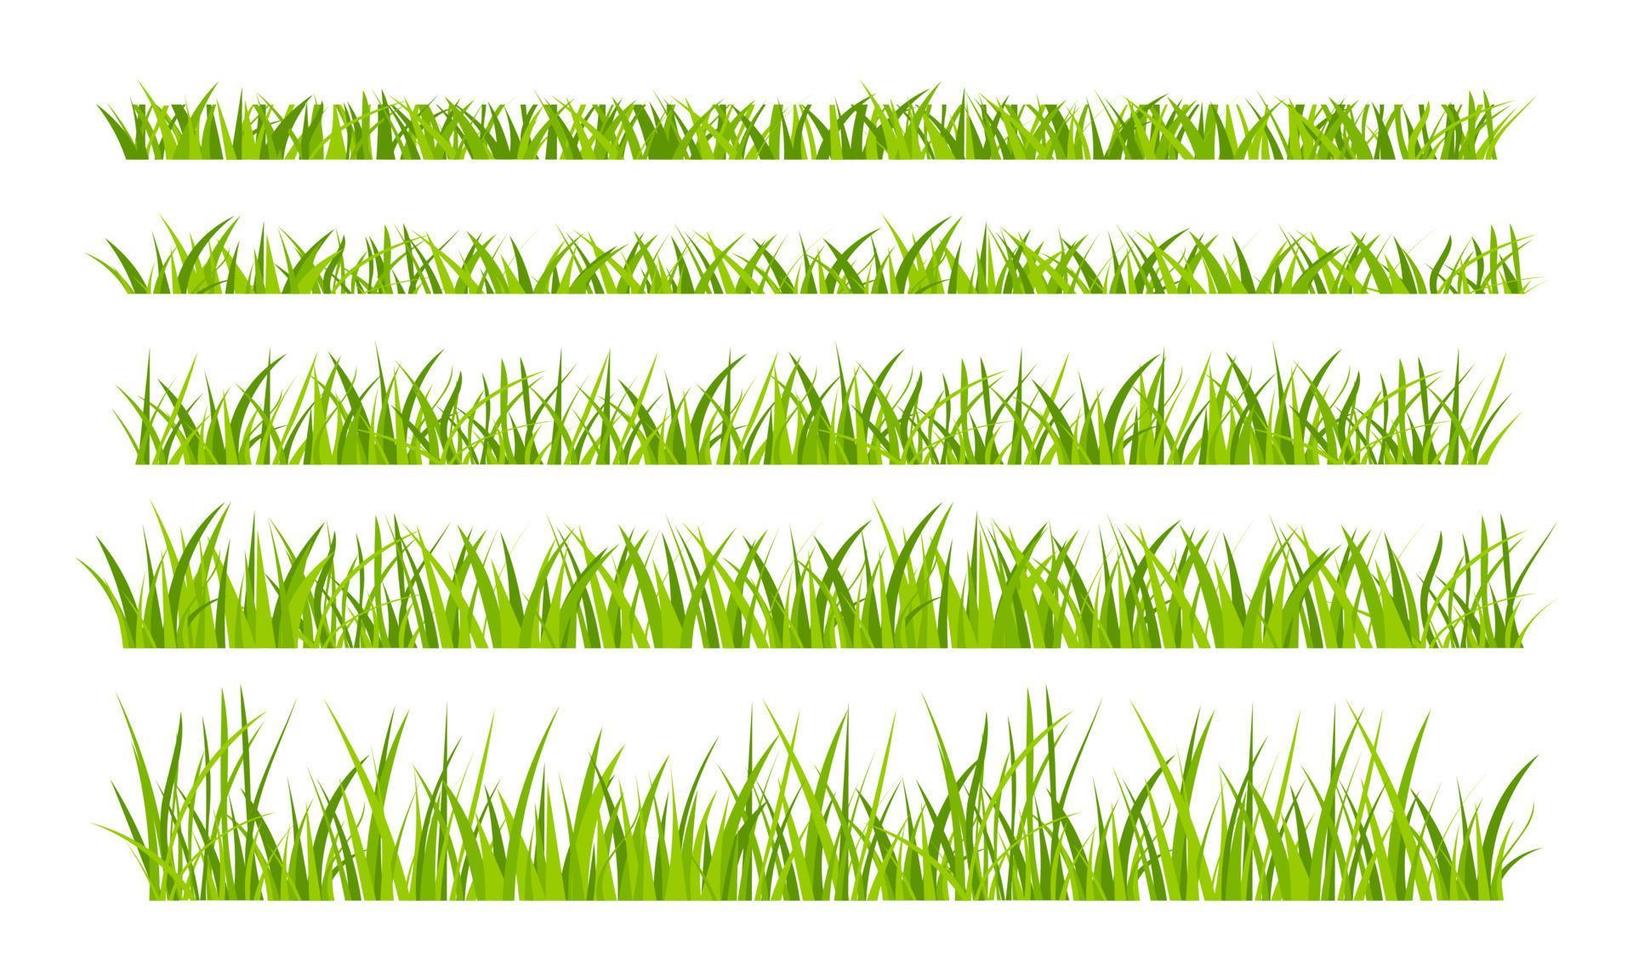 Green grassland lawn field border flat style design vector illustration set isolated on white background.